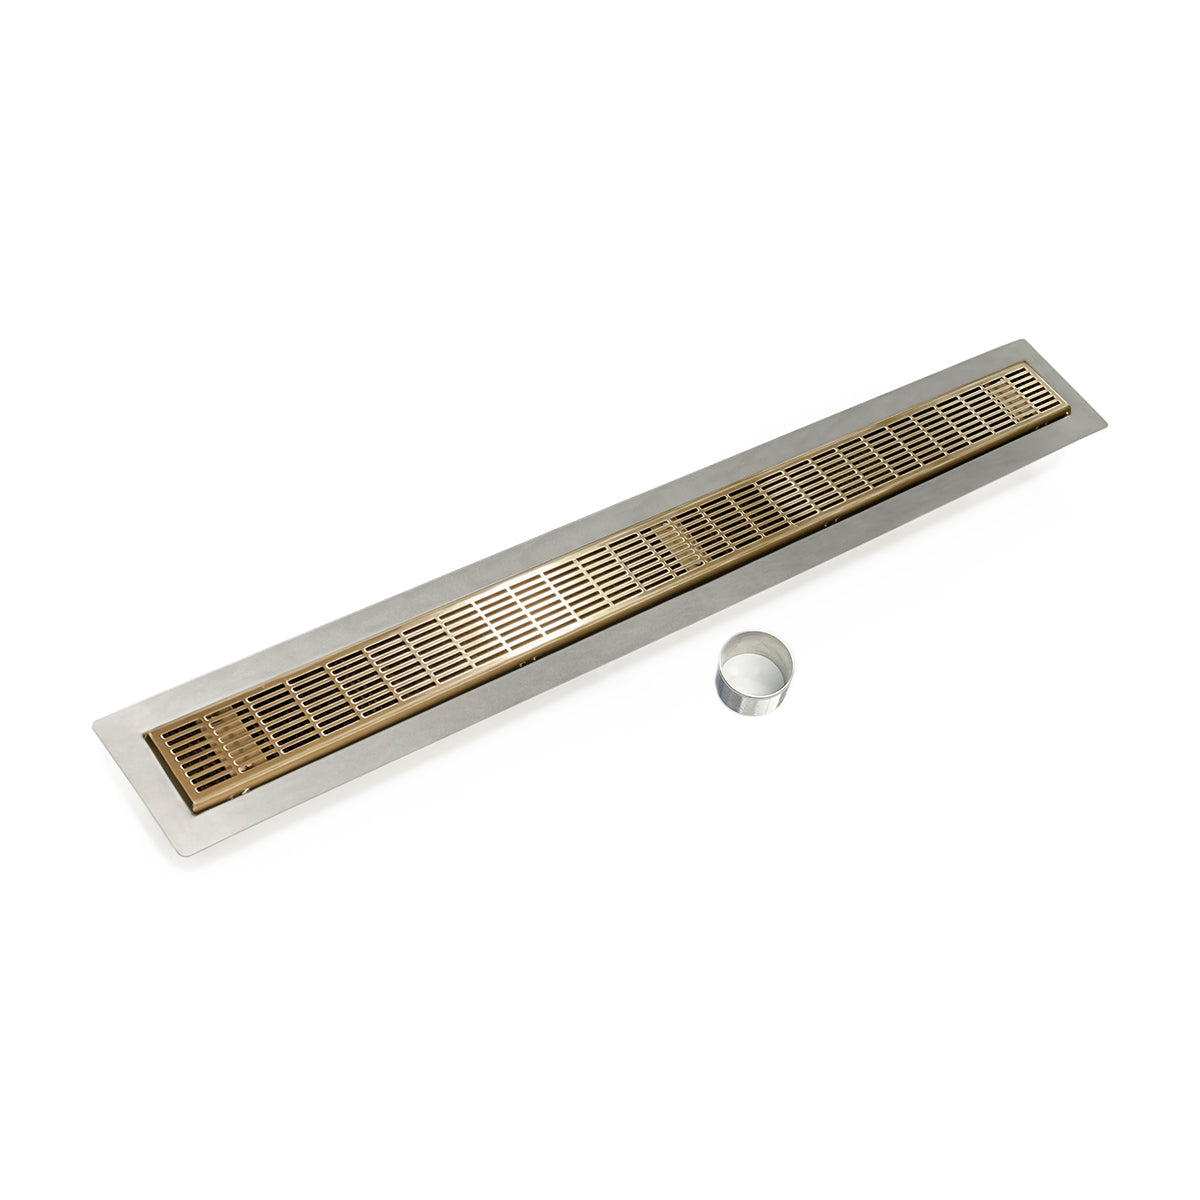 Infinity Drain 24" FCB Series Double Waterproofing Linear Drain Kit with 2 1/2" Perforated Slotted Grate